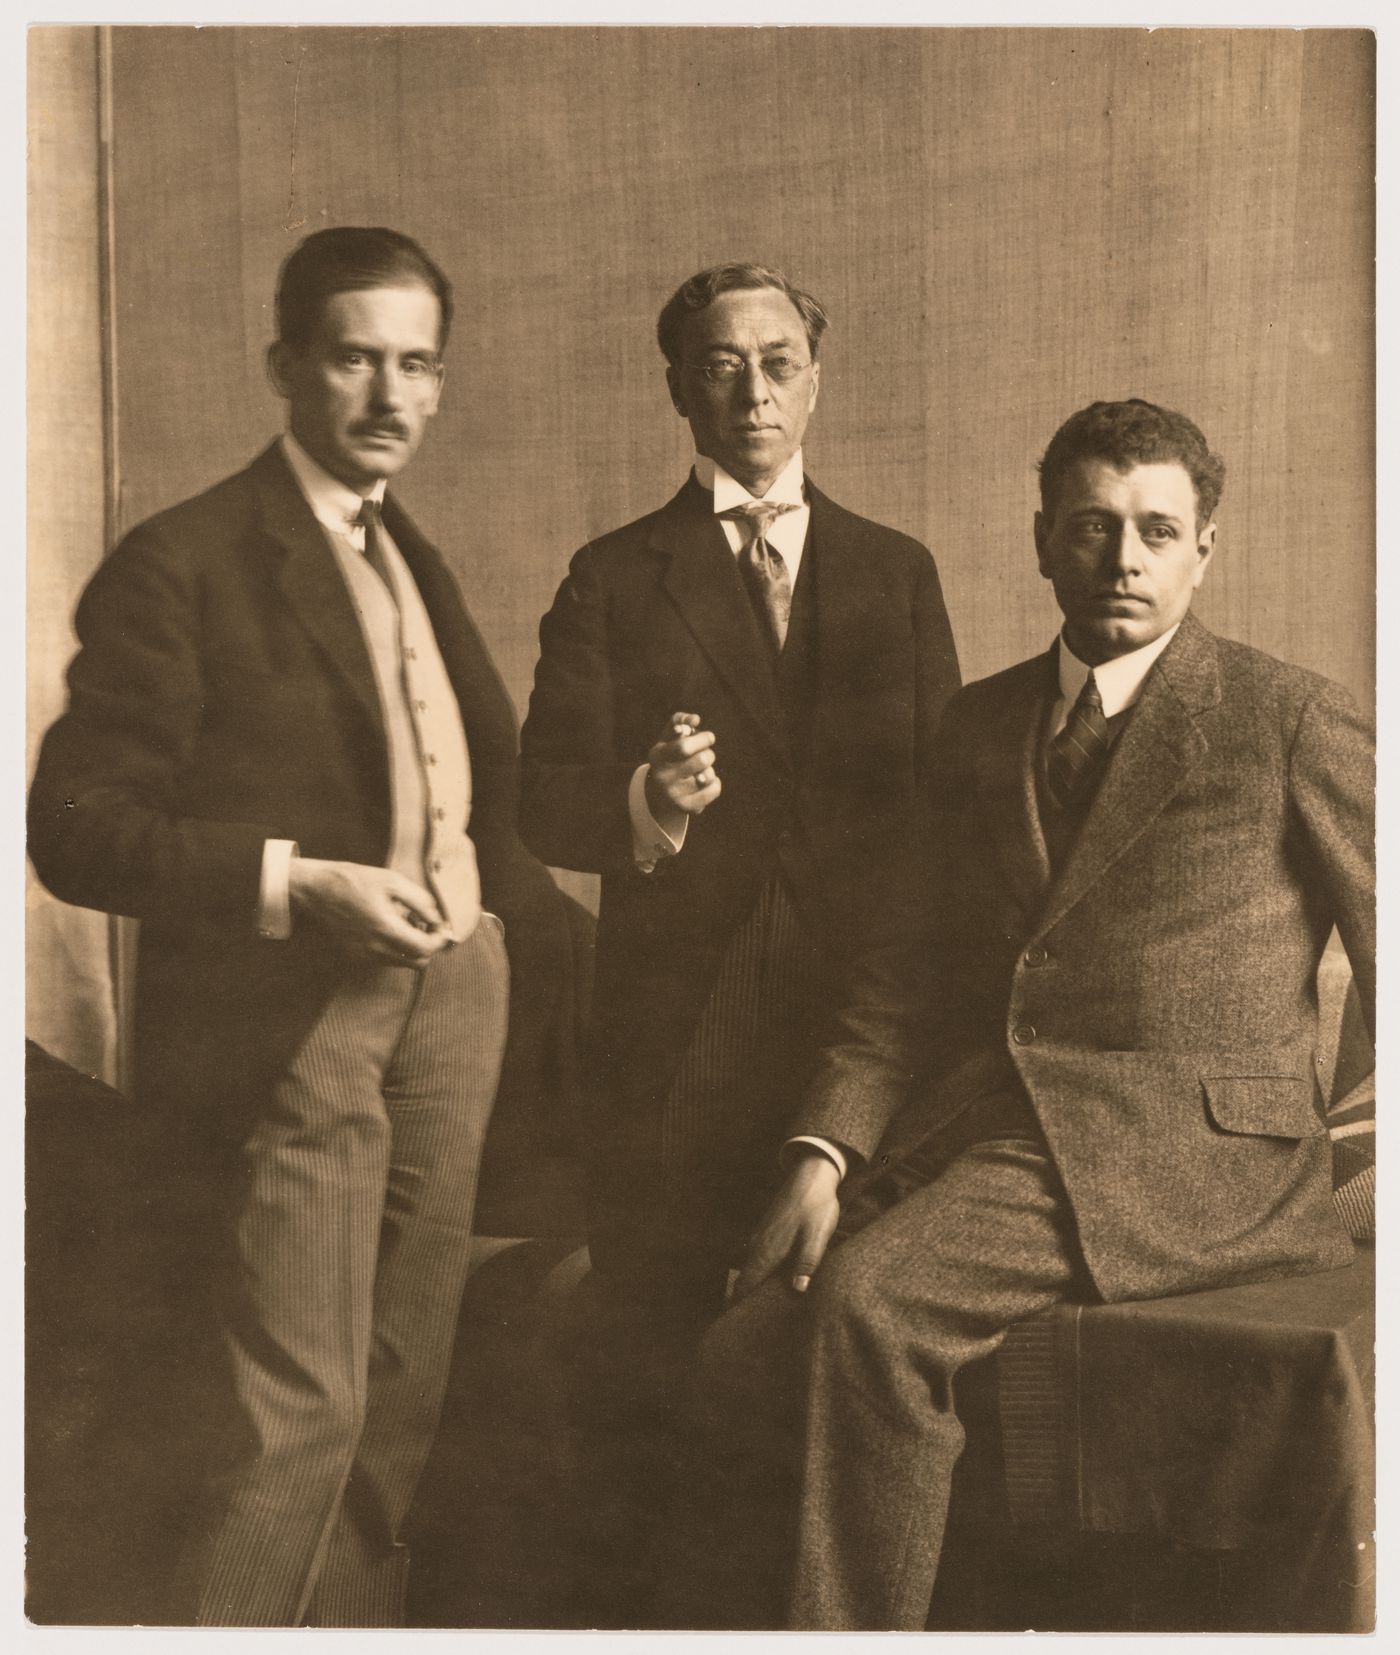 Portrait of J.J.P. Oud, Wassily Kandinsky and Walter Gropius at the Bauhaus Exhibition of 1923 in Weimar, Germany